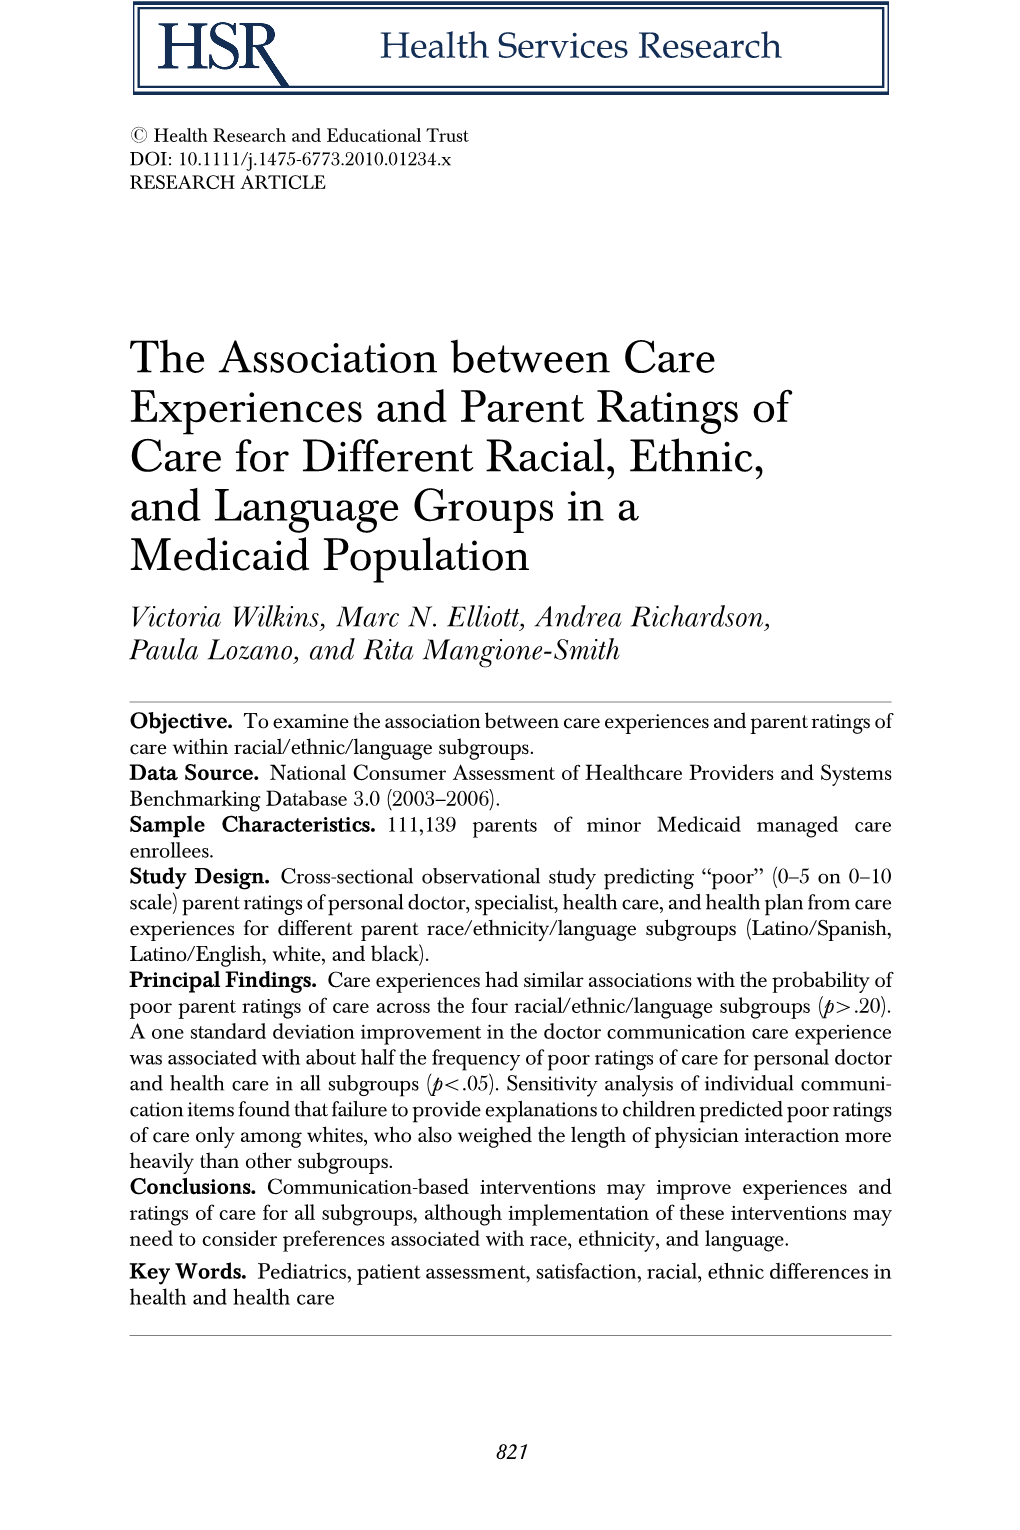 The Association Between Care Experiences and Parent Ratings Of